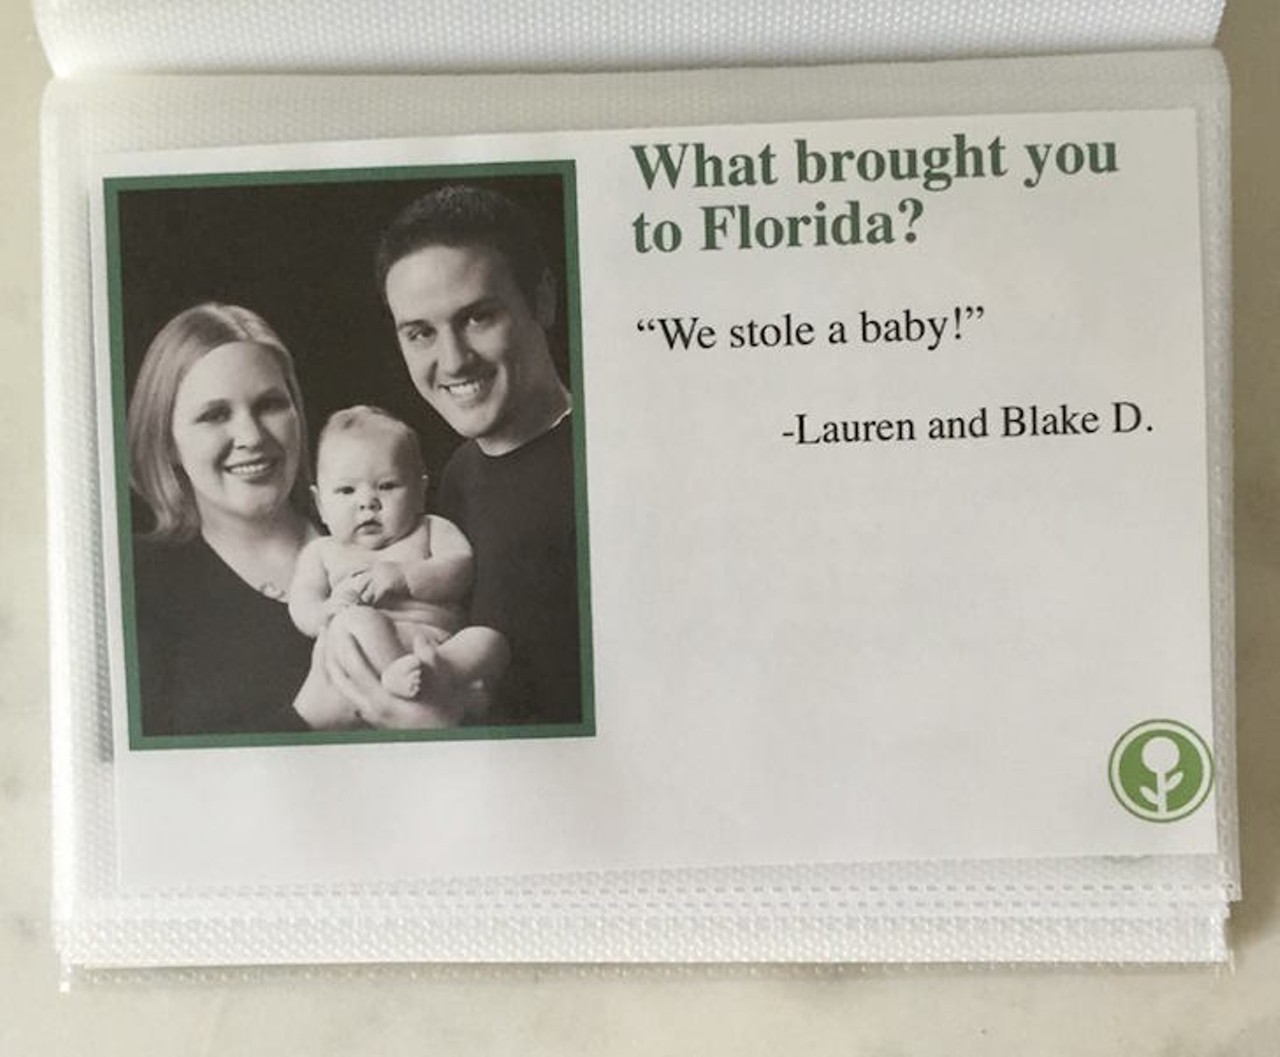 Someone left this fake guestbook at a Florida Airbnb and it's hilarious